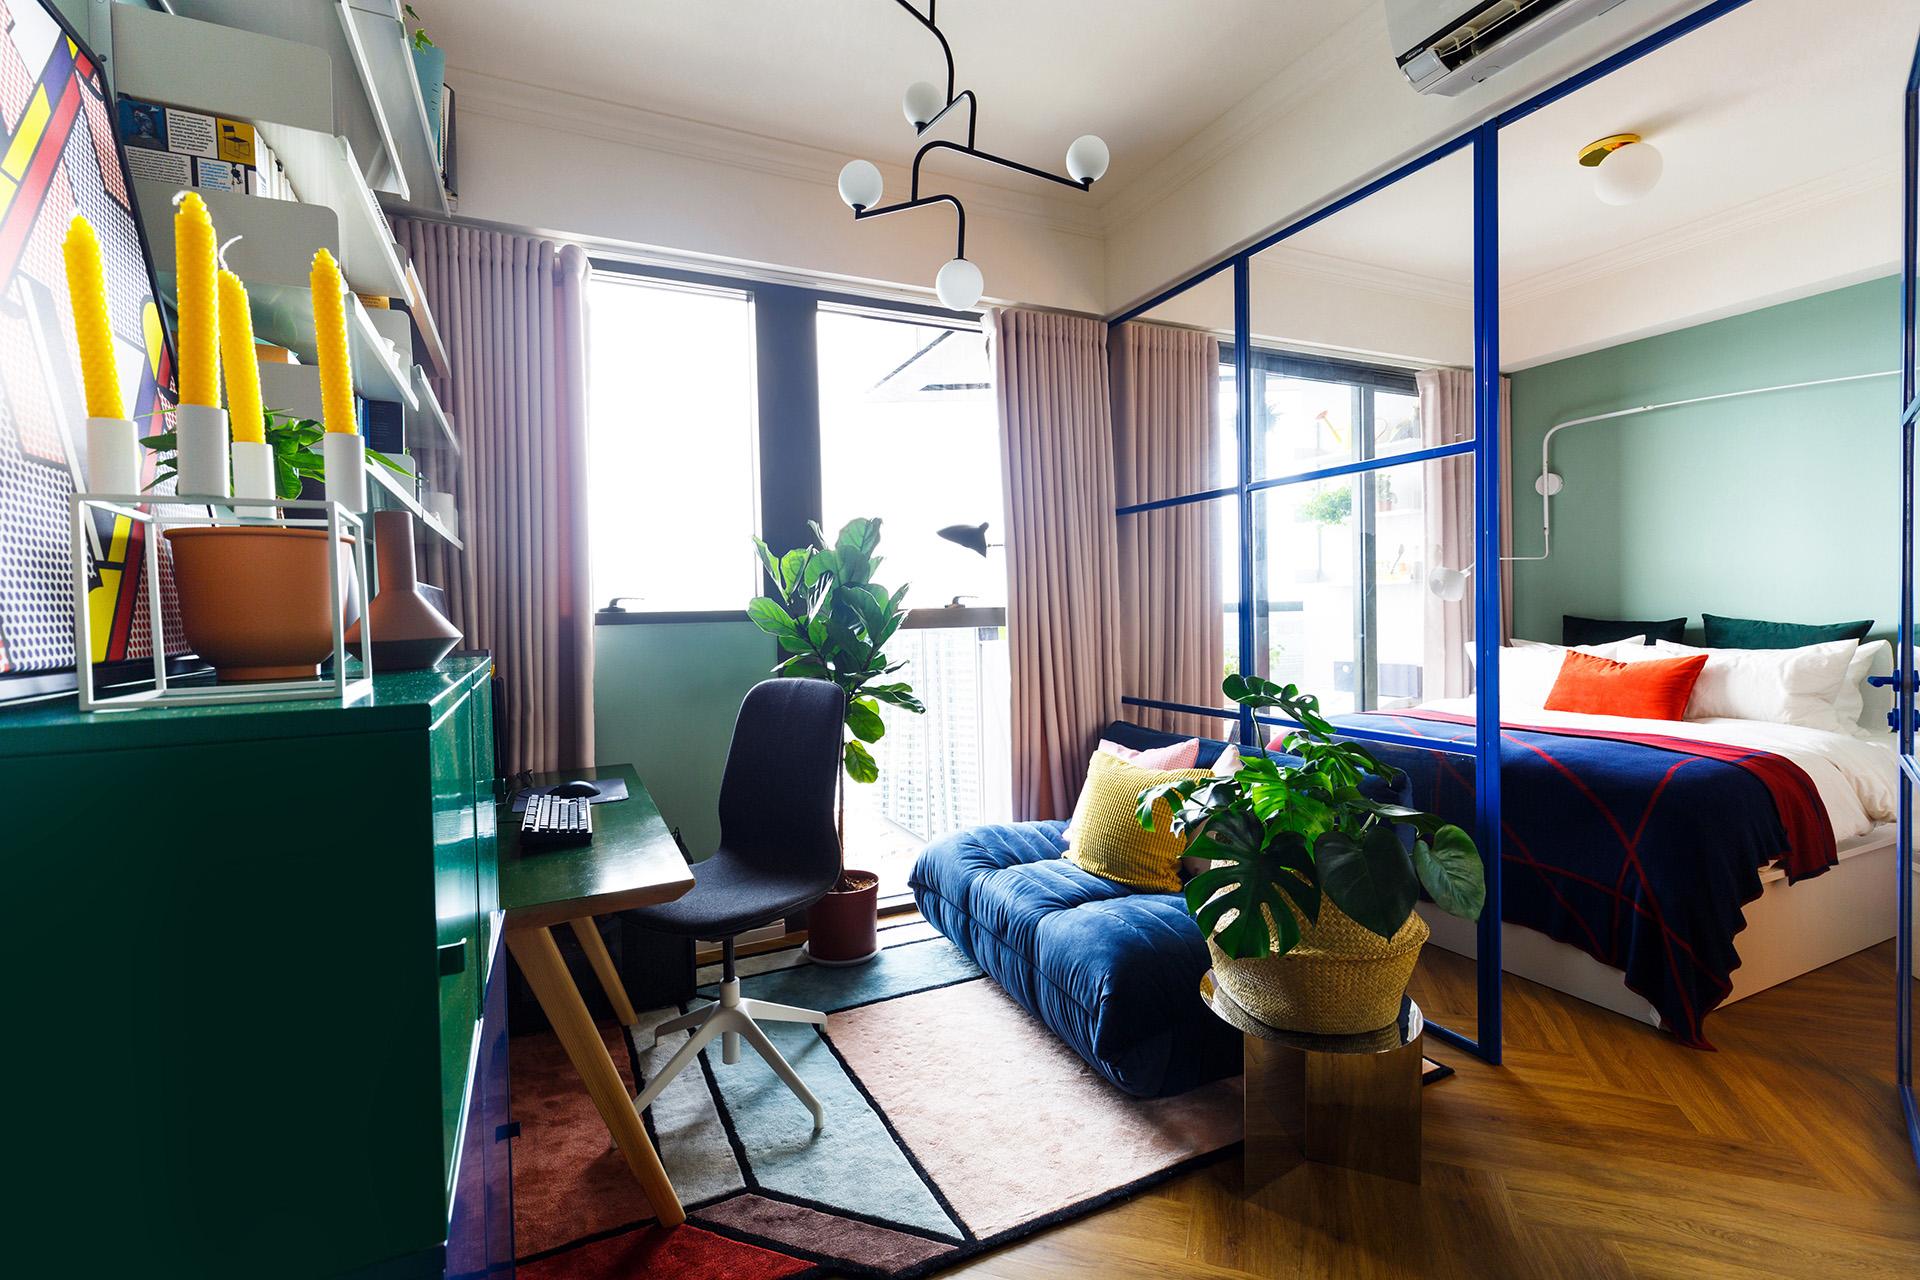 An Explosion of Colour in this Small Singapore Condo